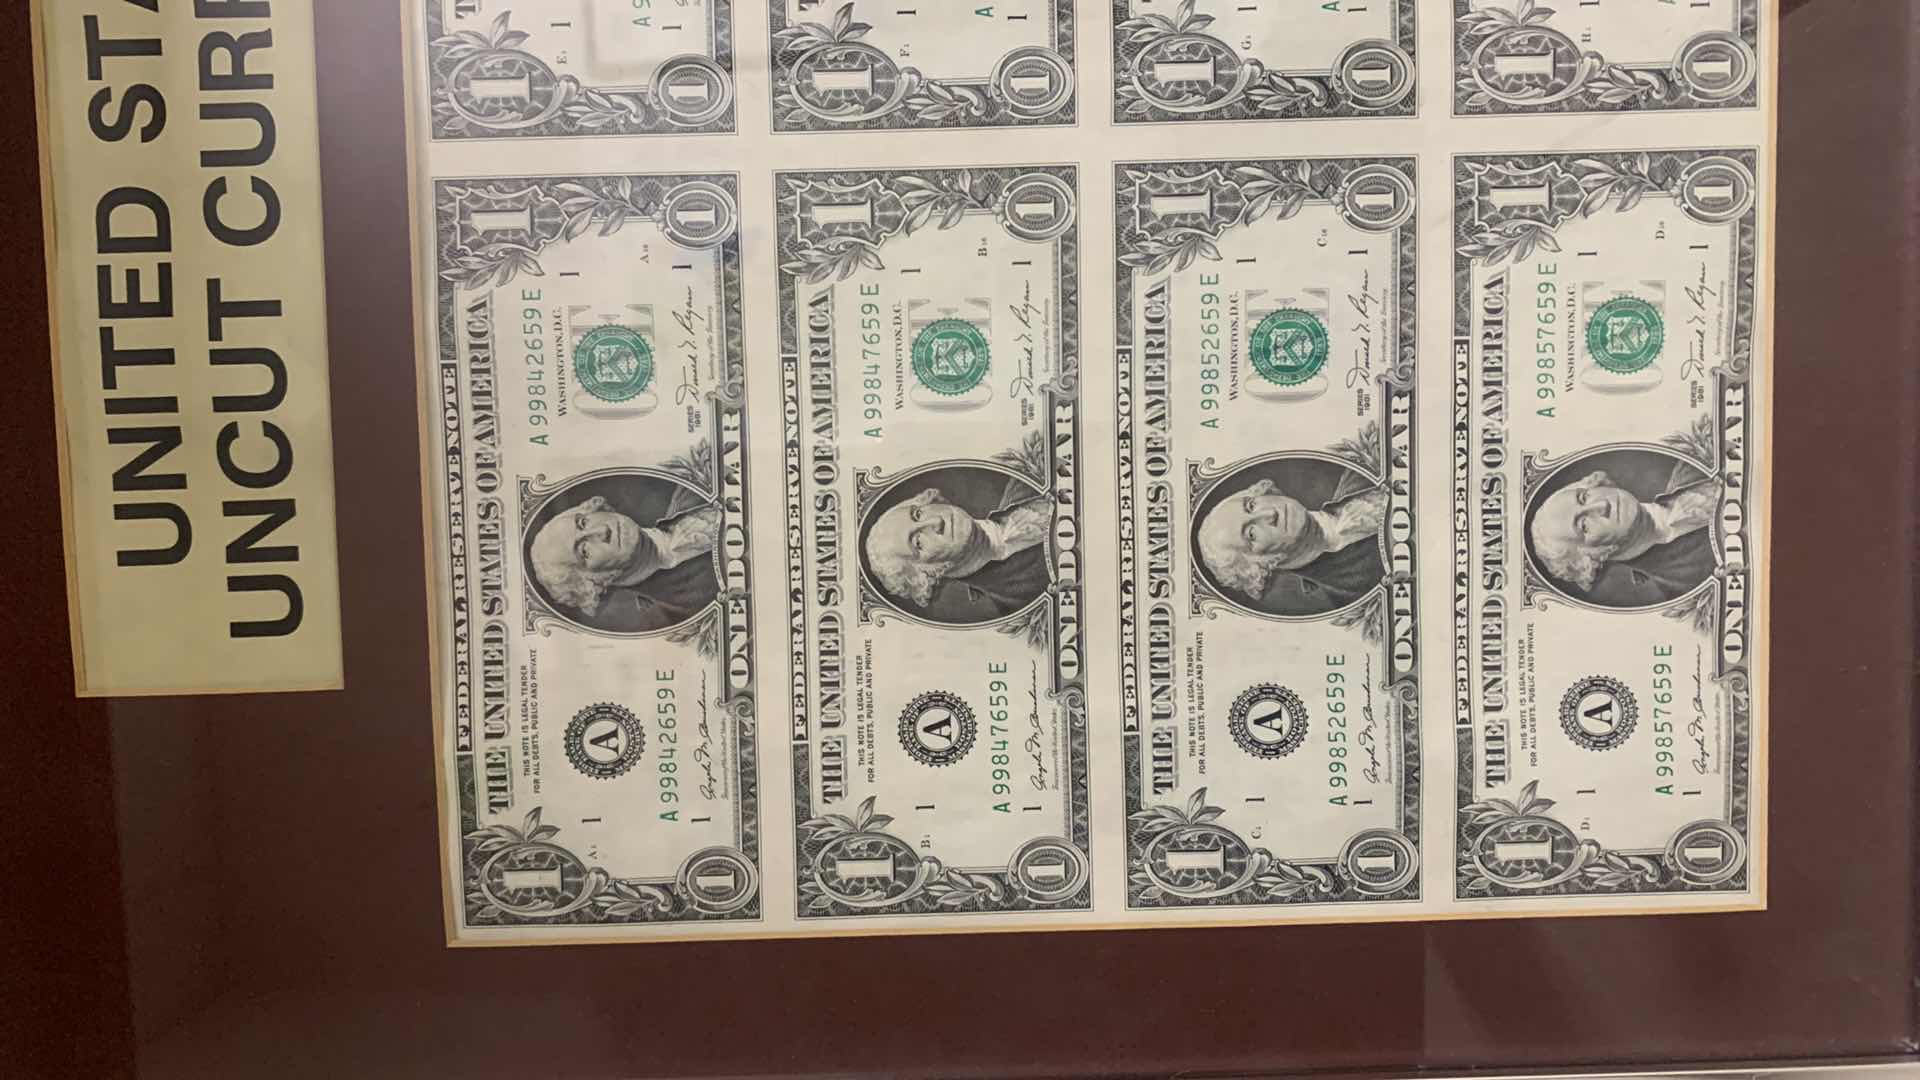 Photo 2 of FRAMED UNITED STATES UNCUT CURRENCY 8- $1 BILLS